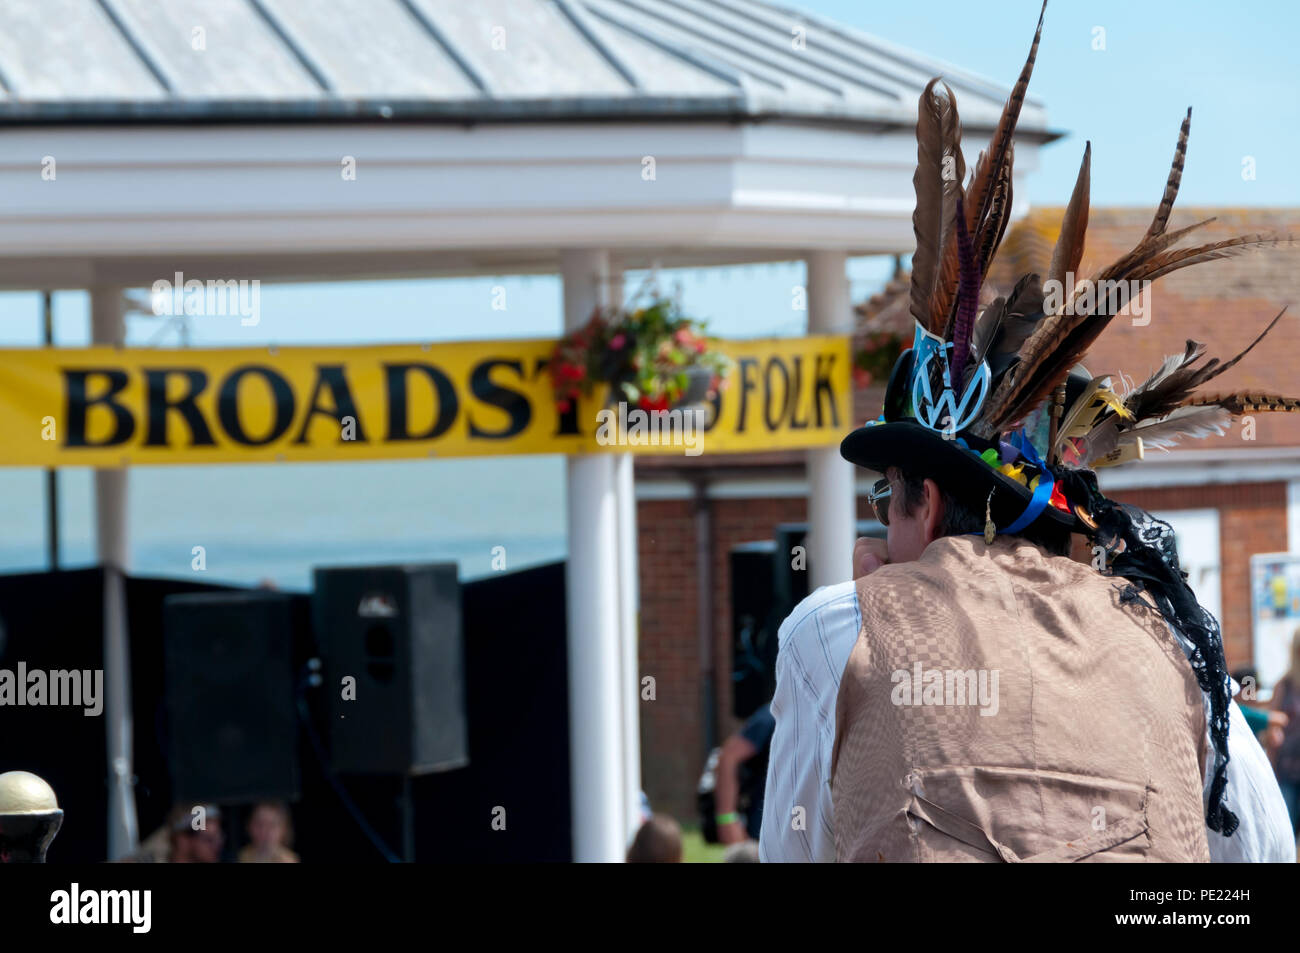 Broadstairs, Kent, UK. 11 August 2018. On the first day of the 53rd Broadstairs Folk Week musicians from around the British Isles, and some from the rest of the world, gather in the Kent seaside town for a week of concerts, singing, dancing and other events.  On the opening day there is a large contingent of morris dancers entertaining crowds on the promenade. Credit Steven Sheppardson/Alamy Live News. Stock Photo